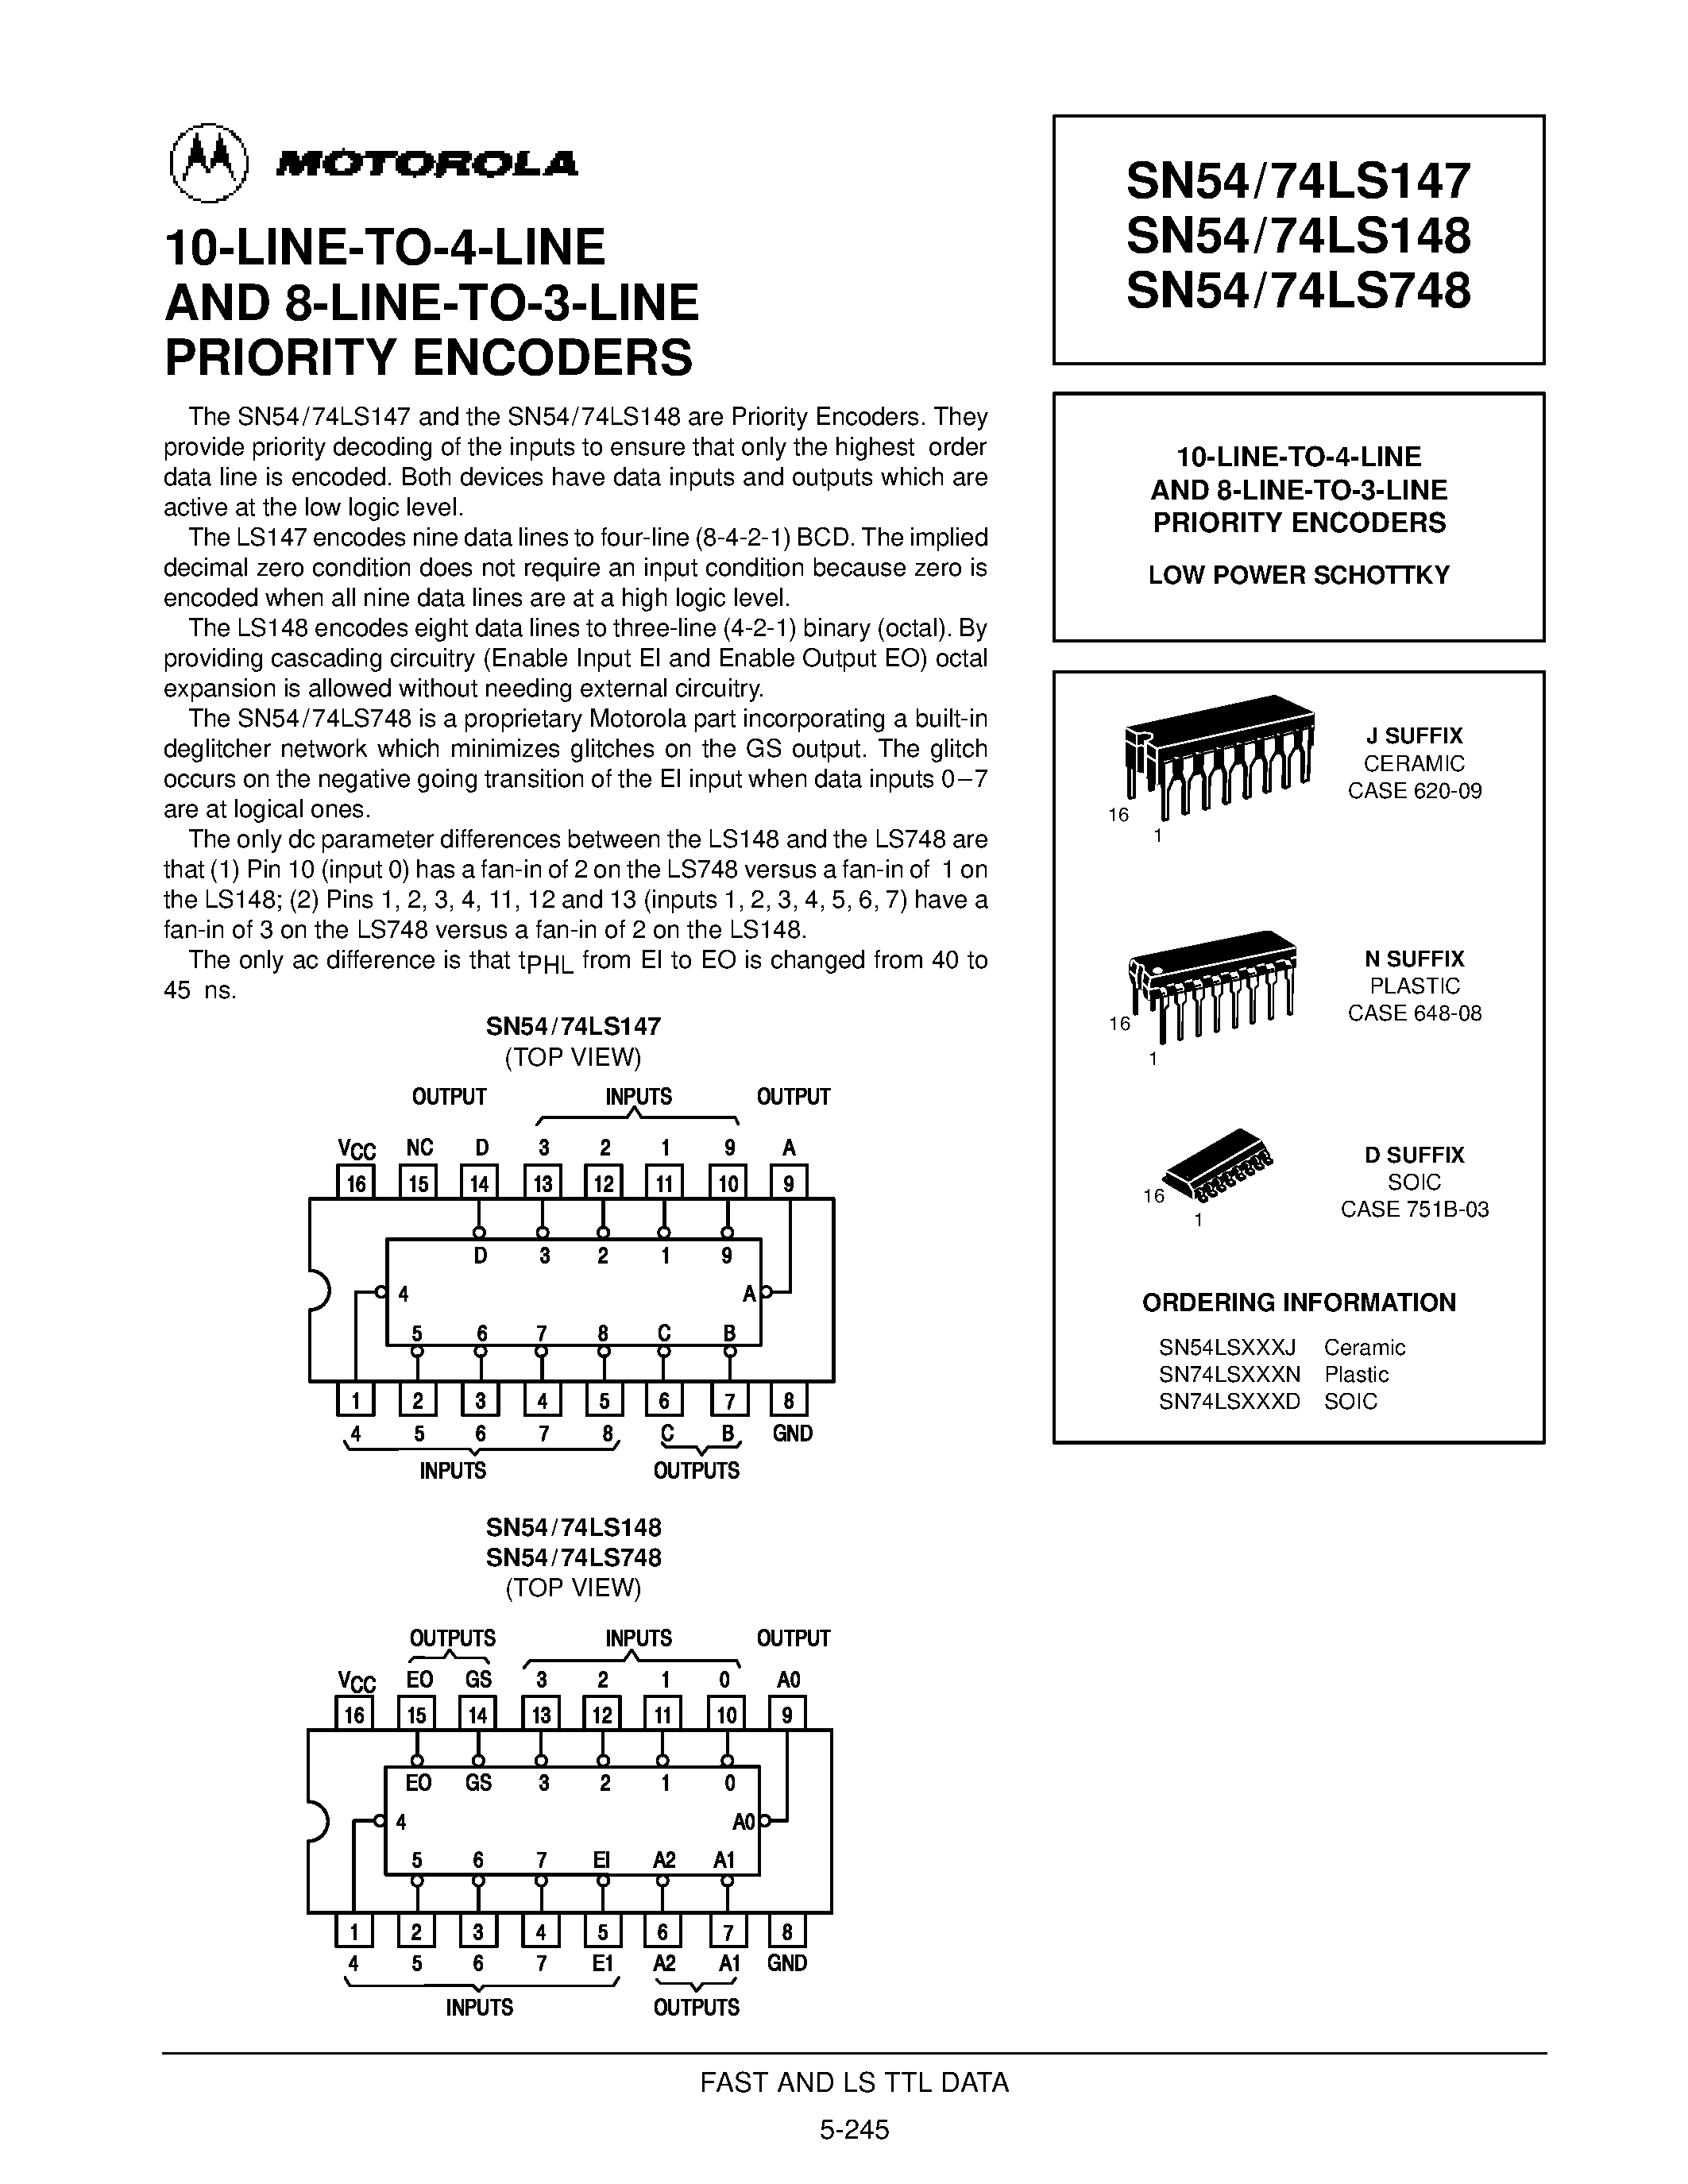 Datasheet SN74LS748D - 10-LINE-TO-4-LINE AND 8-LINE-TO-3-LINE PRIORITY ENCODERS page 1